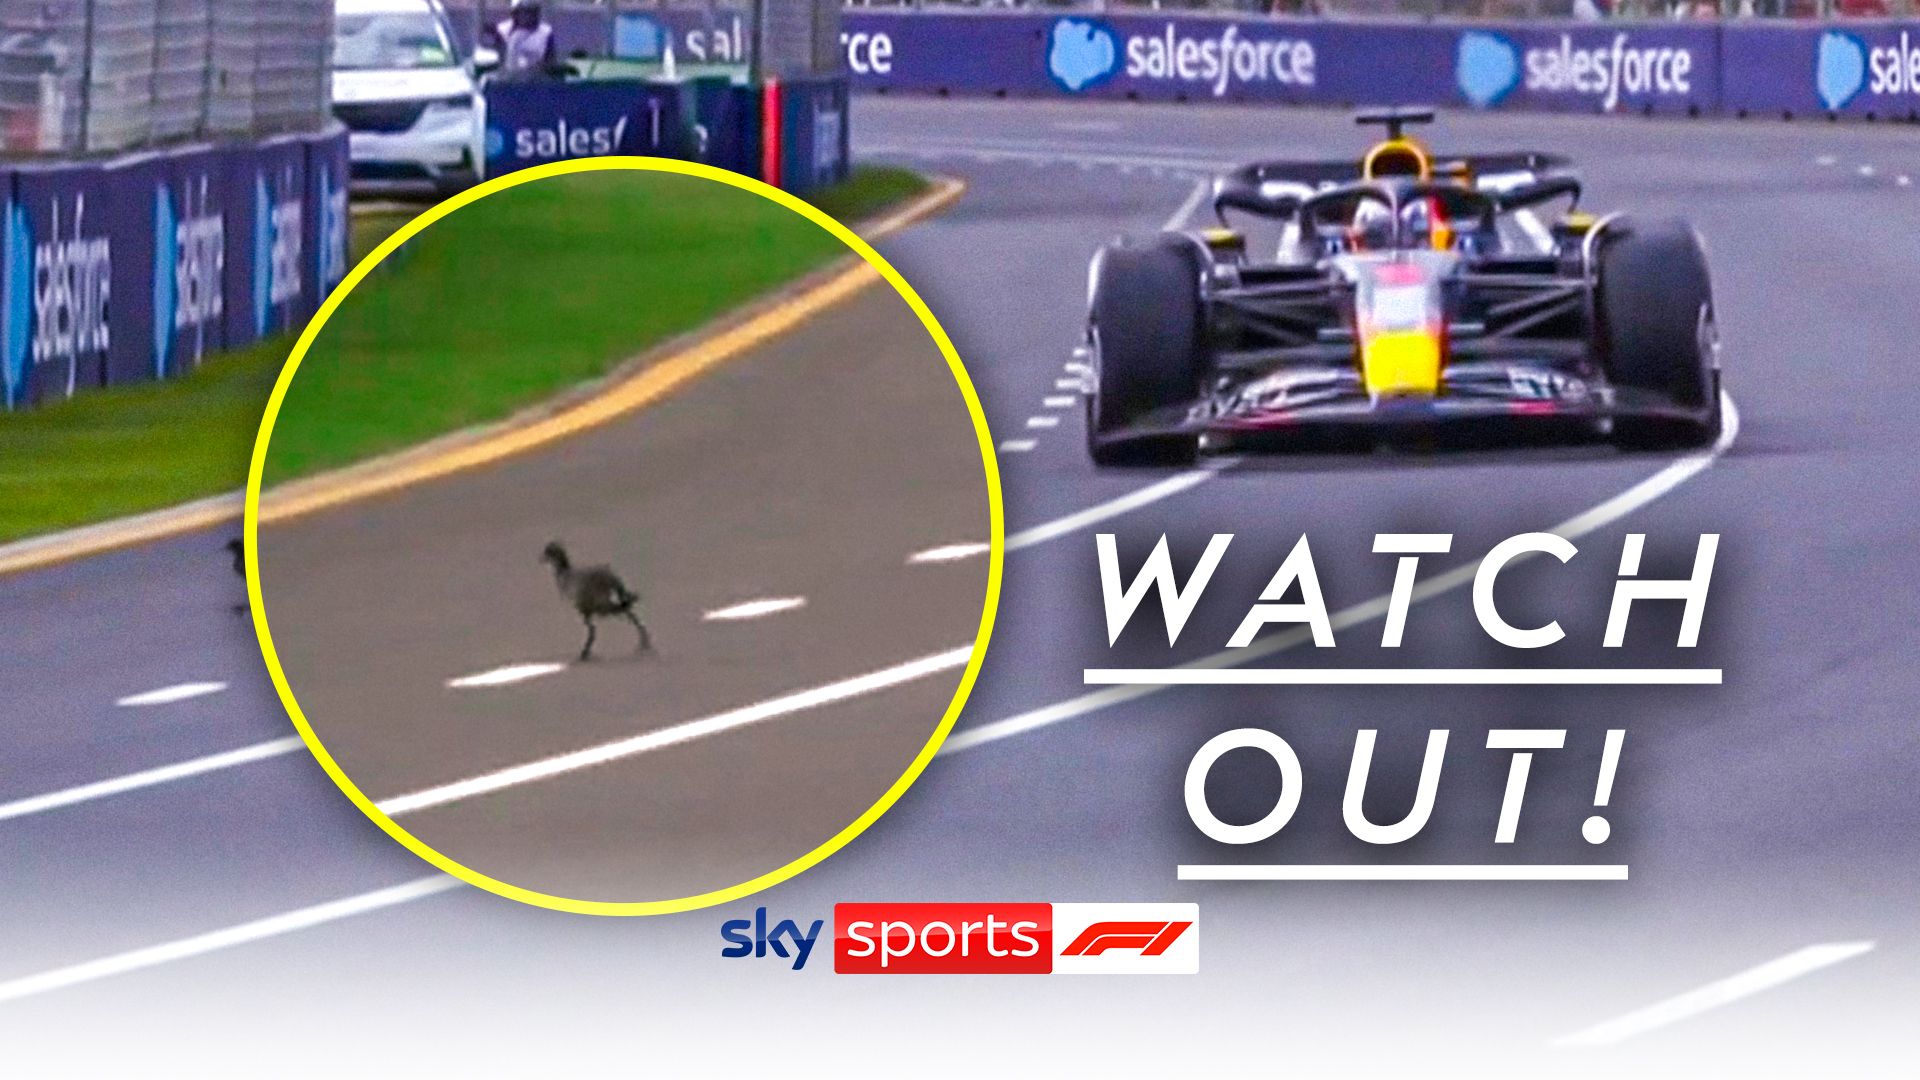 'Not a good time to cross the road' - Max narrowly avoids bird on track